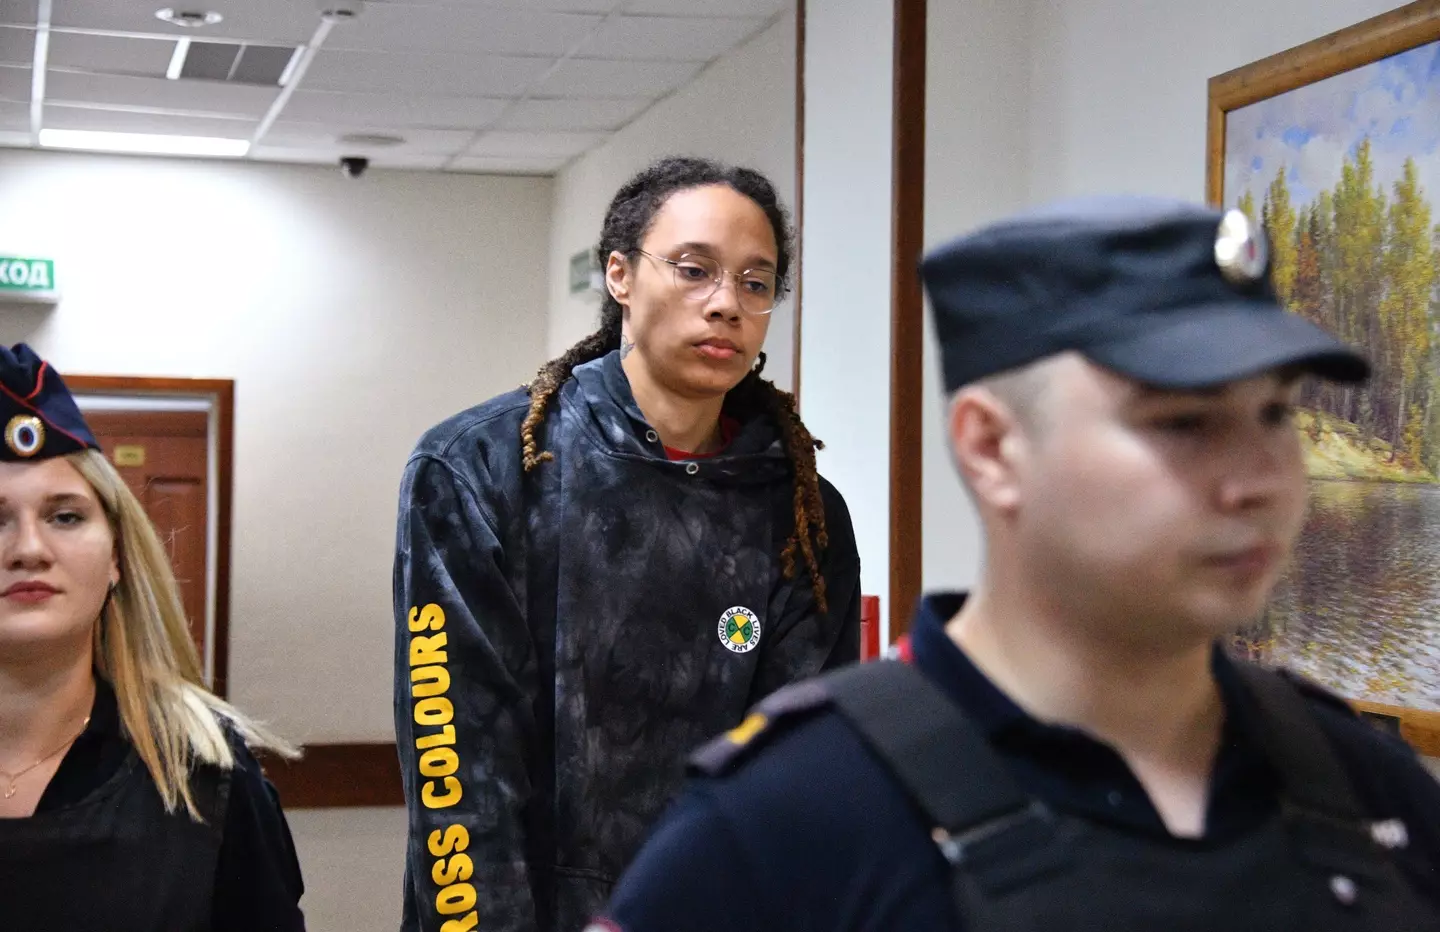 WNBA star Brittney Griner will see out her term in a Russian penal colony.